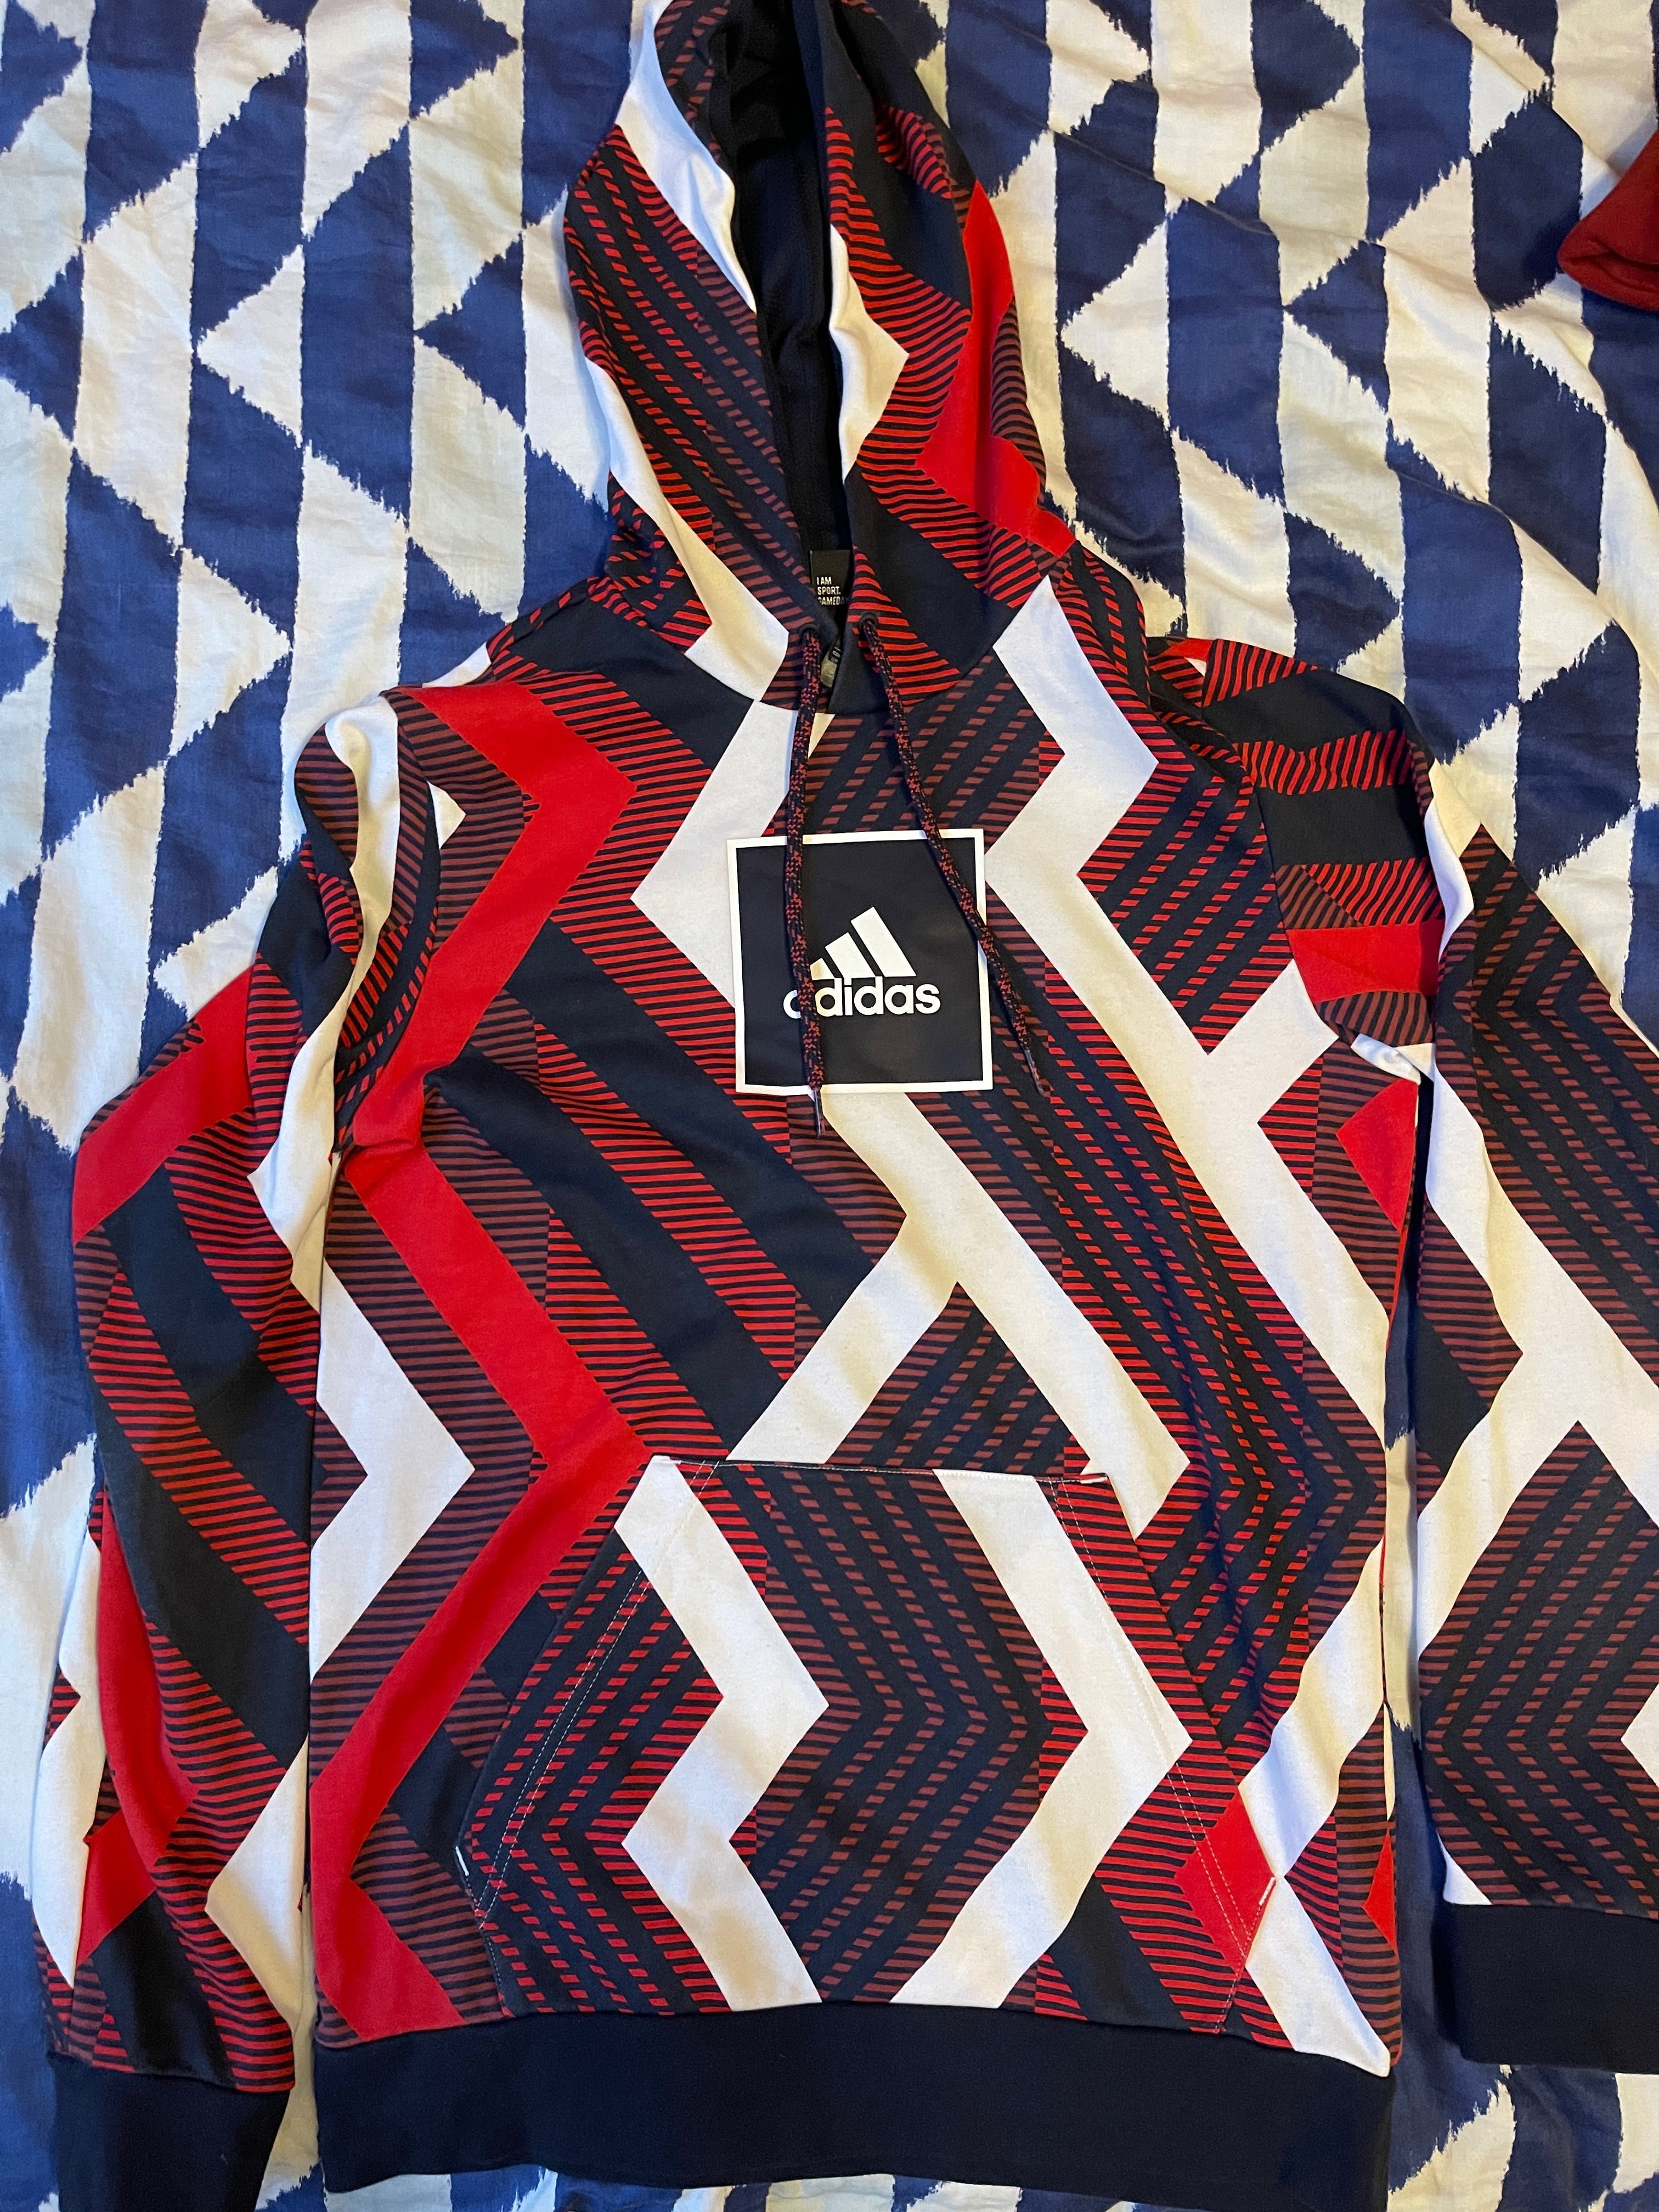 Adidas hoodie - red and blue